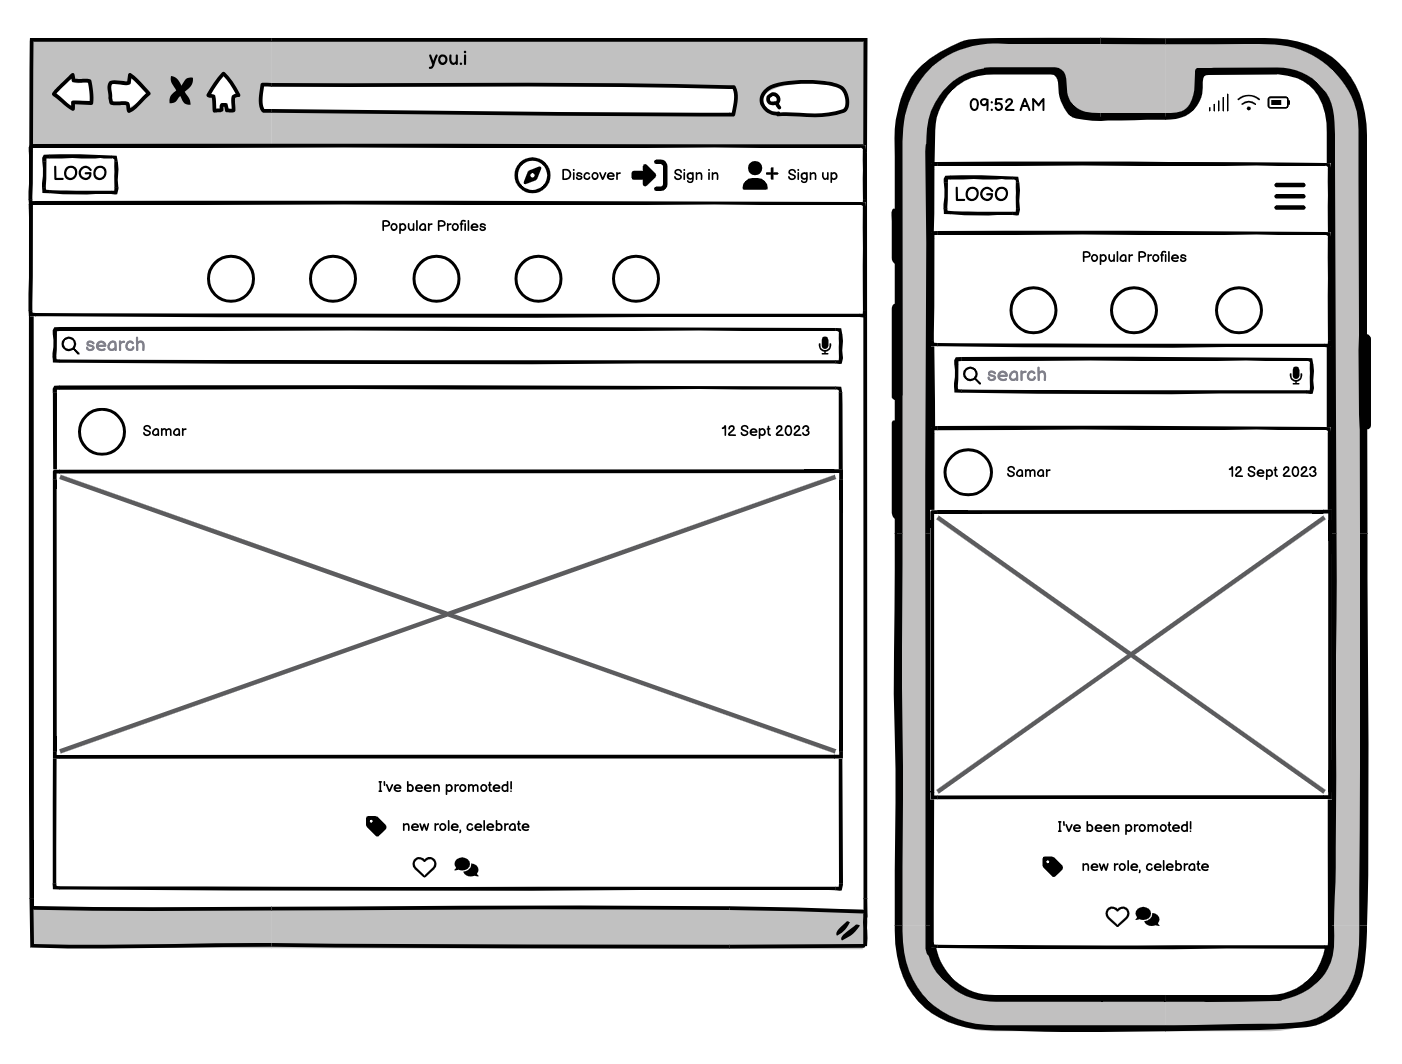 Logged out wireframe